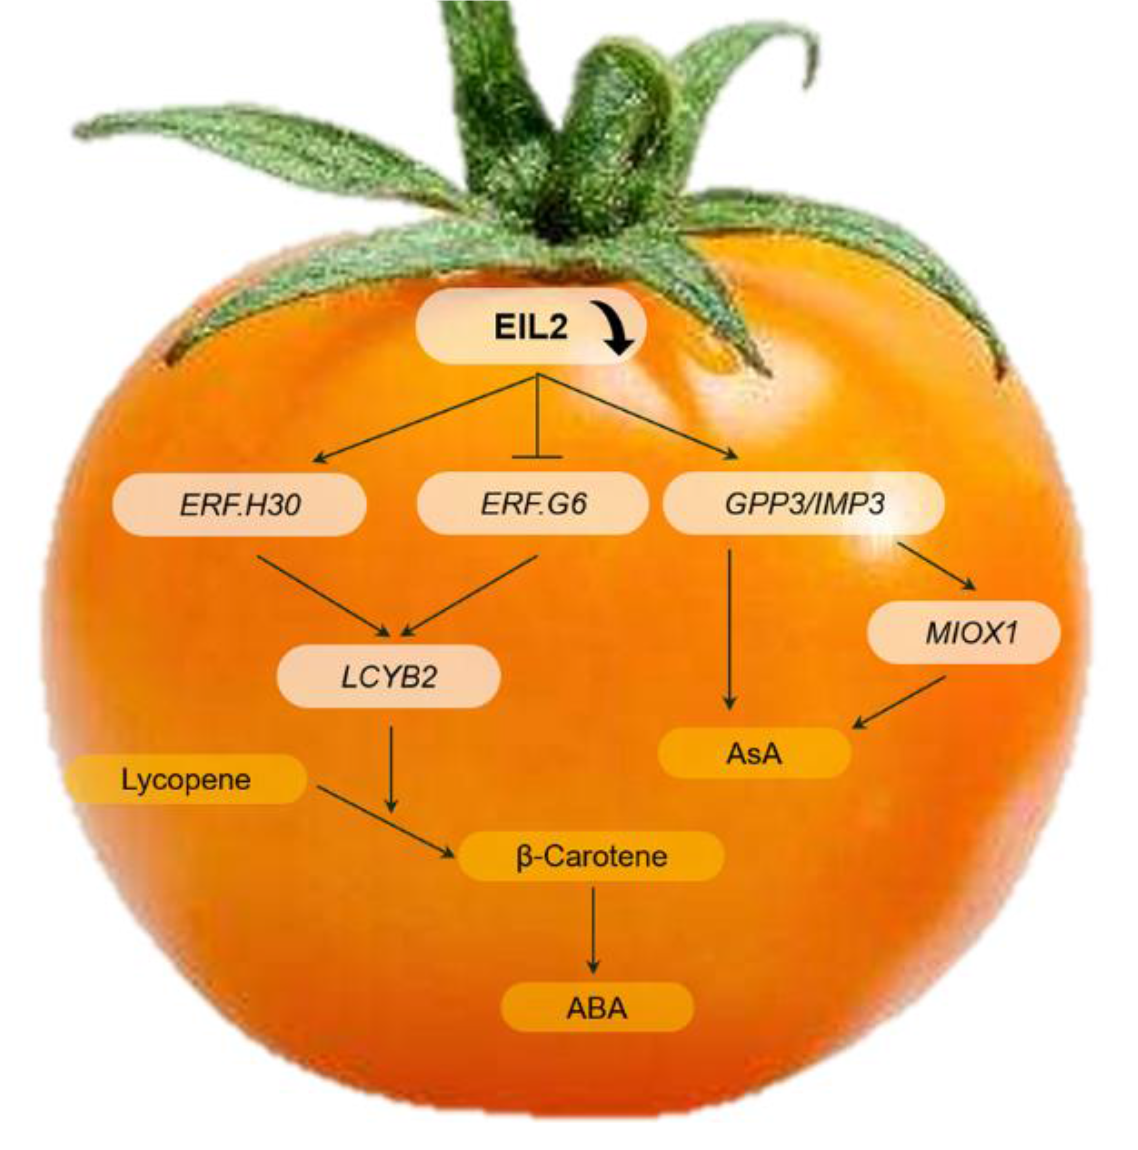 tomato_metabolomics_model_of_the_role_of_SIEIL2_in_enhancing_β-carotene_and_asa_accumulation